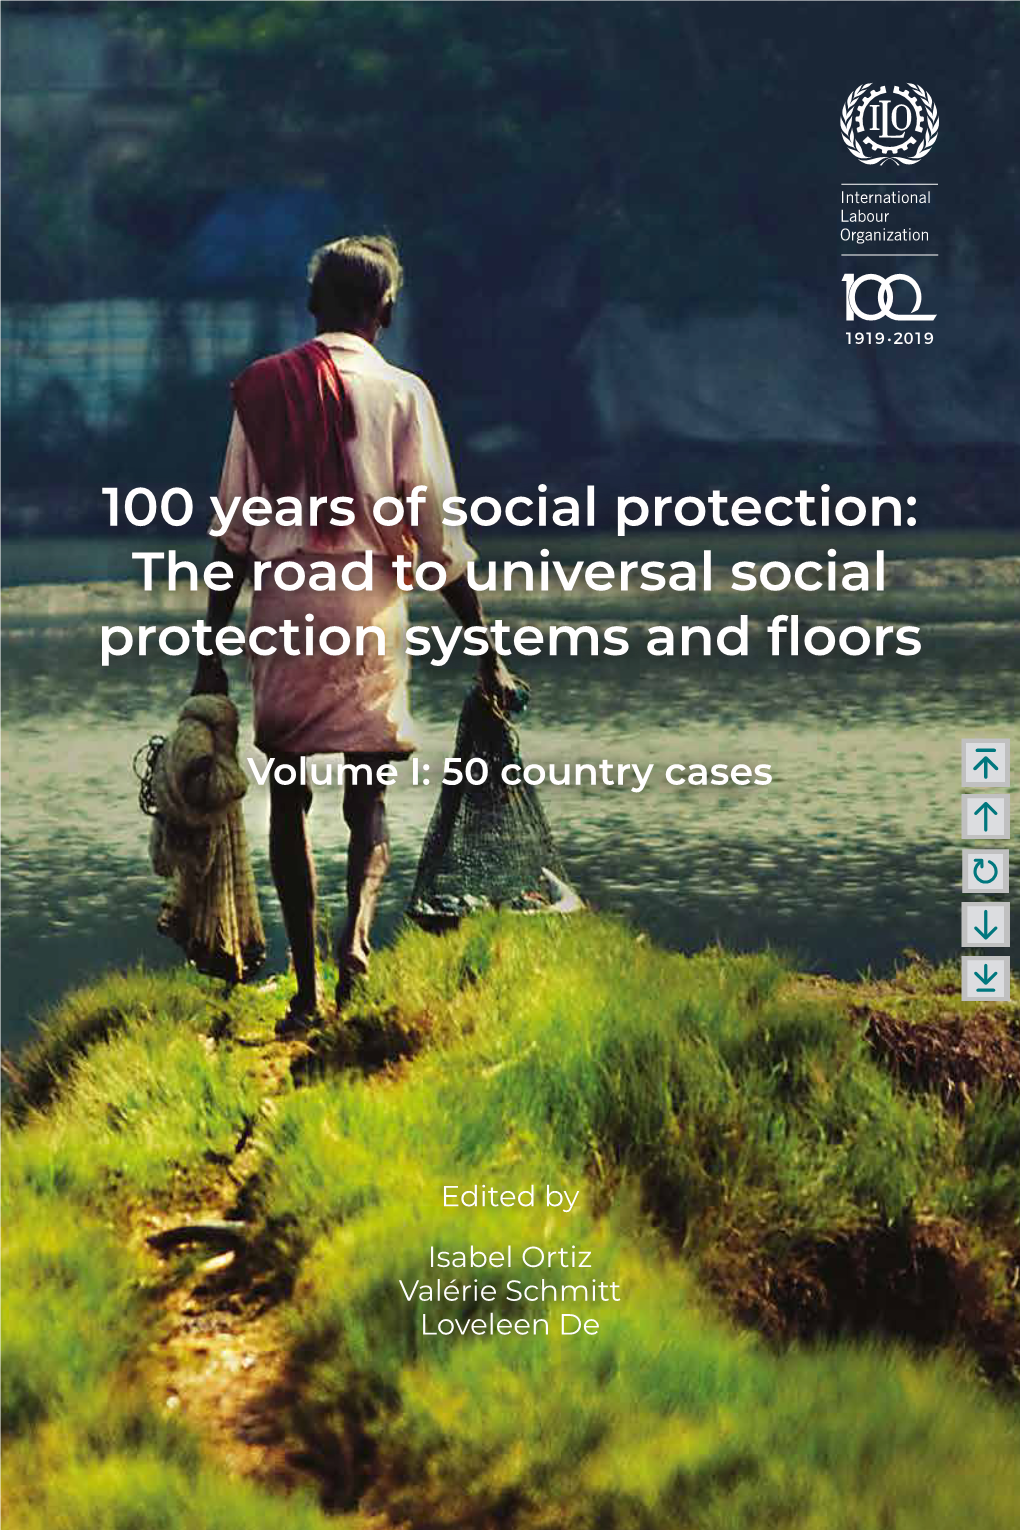 The Road to Universal Social Protection Systems and Floors